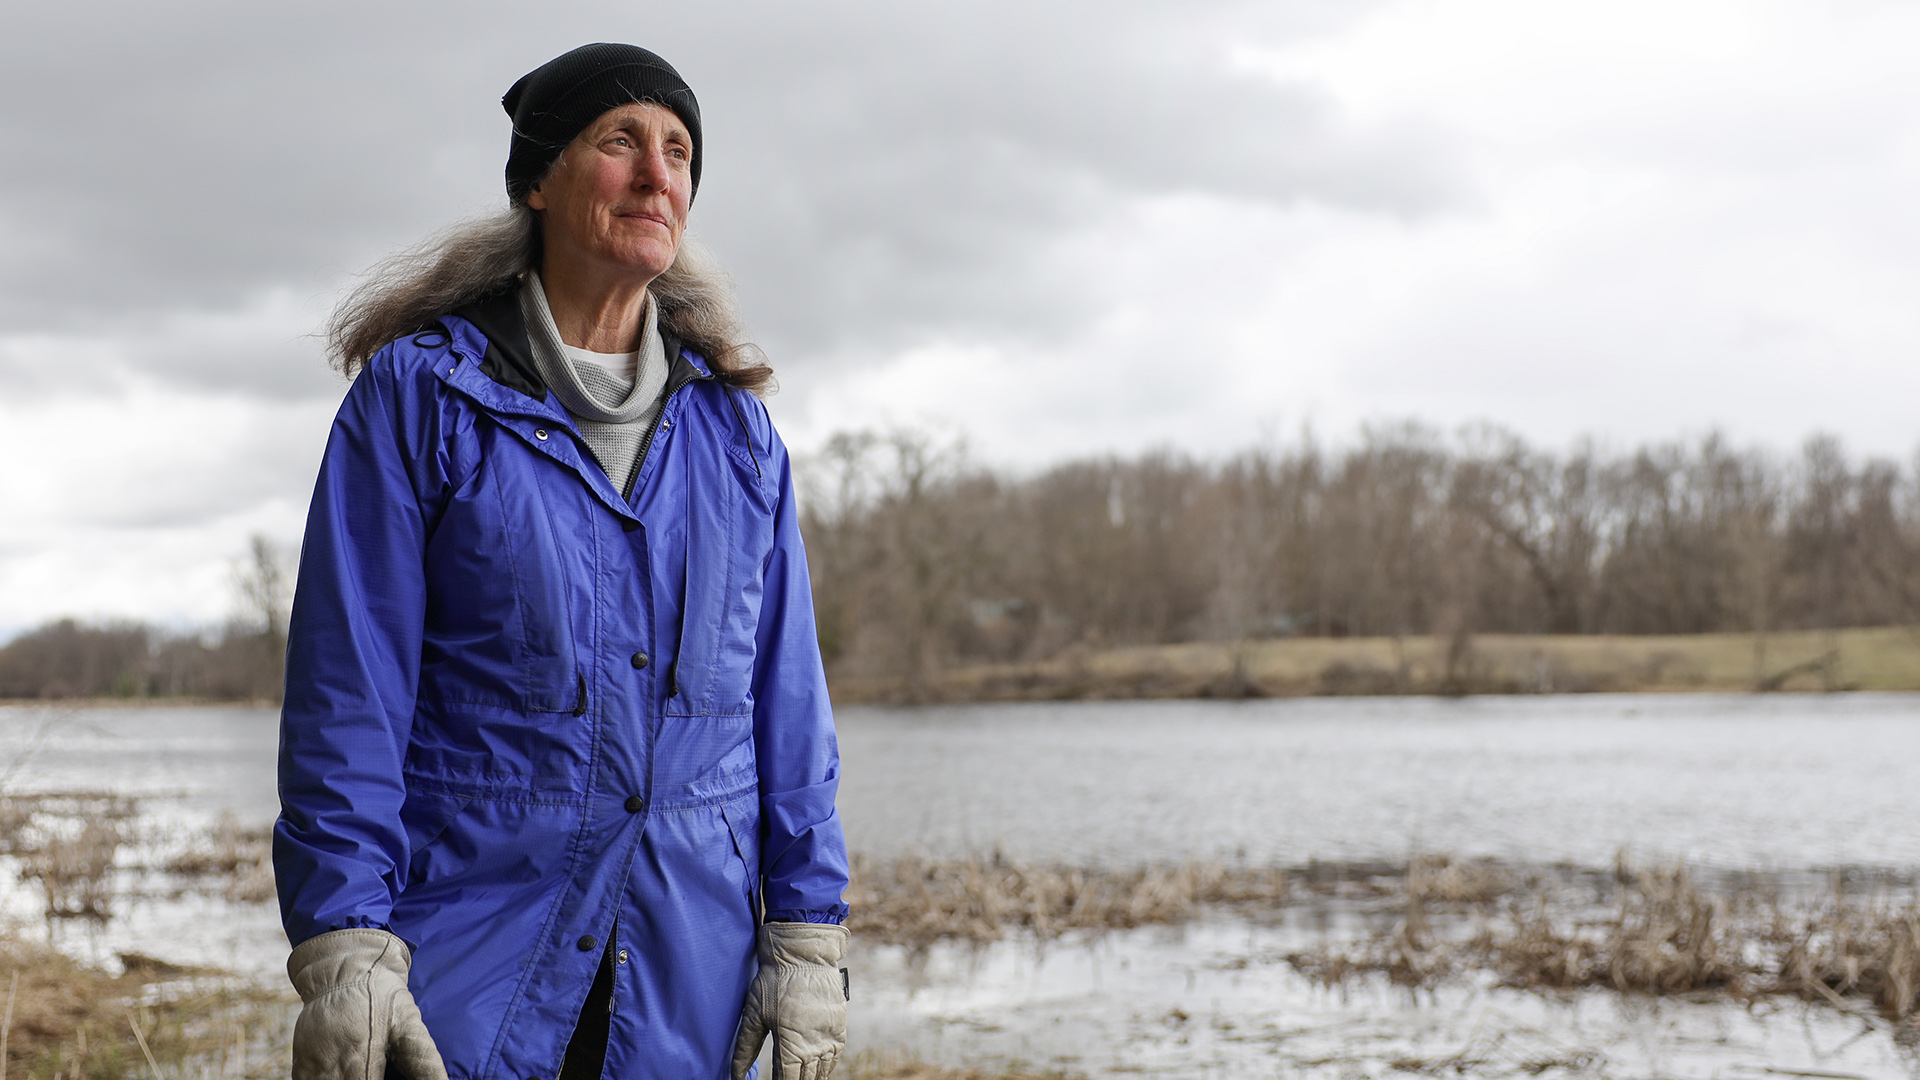 Lisa Doerr stands outside in front of a small body of water, with wetlands in the foreground and a tree-lined shore in the background under an overcast sky.